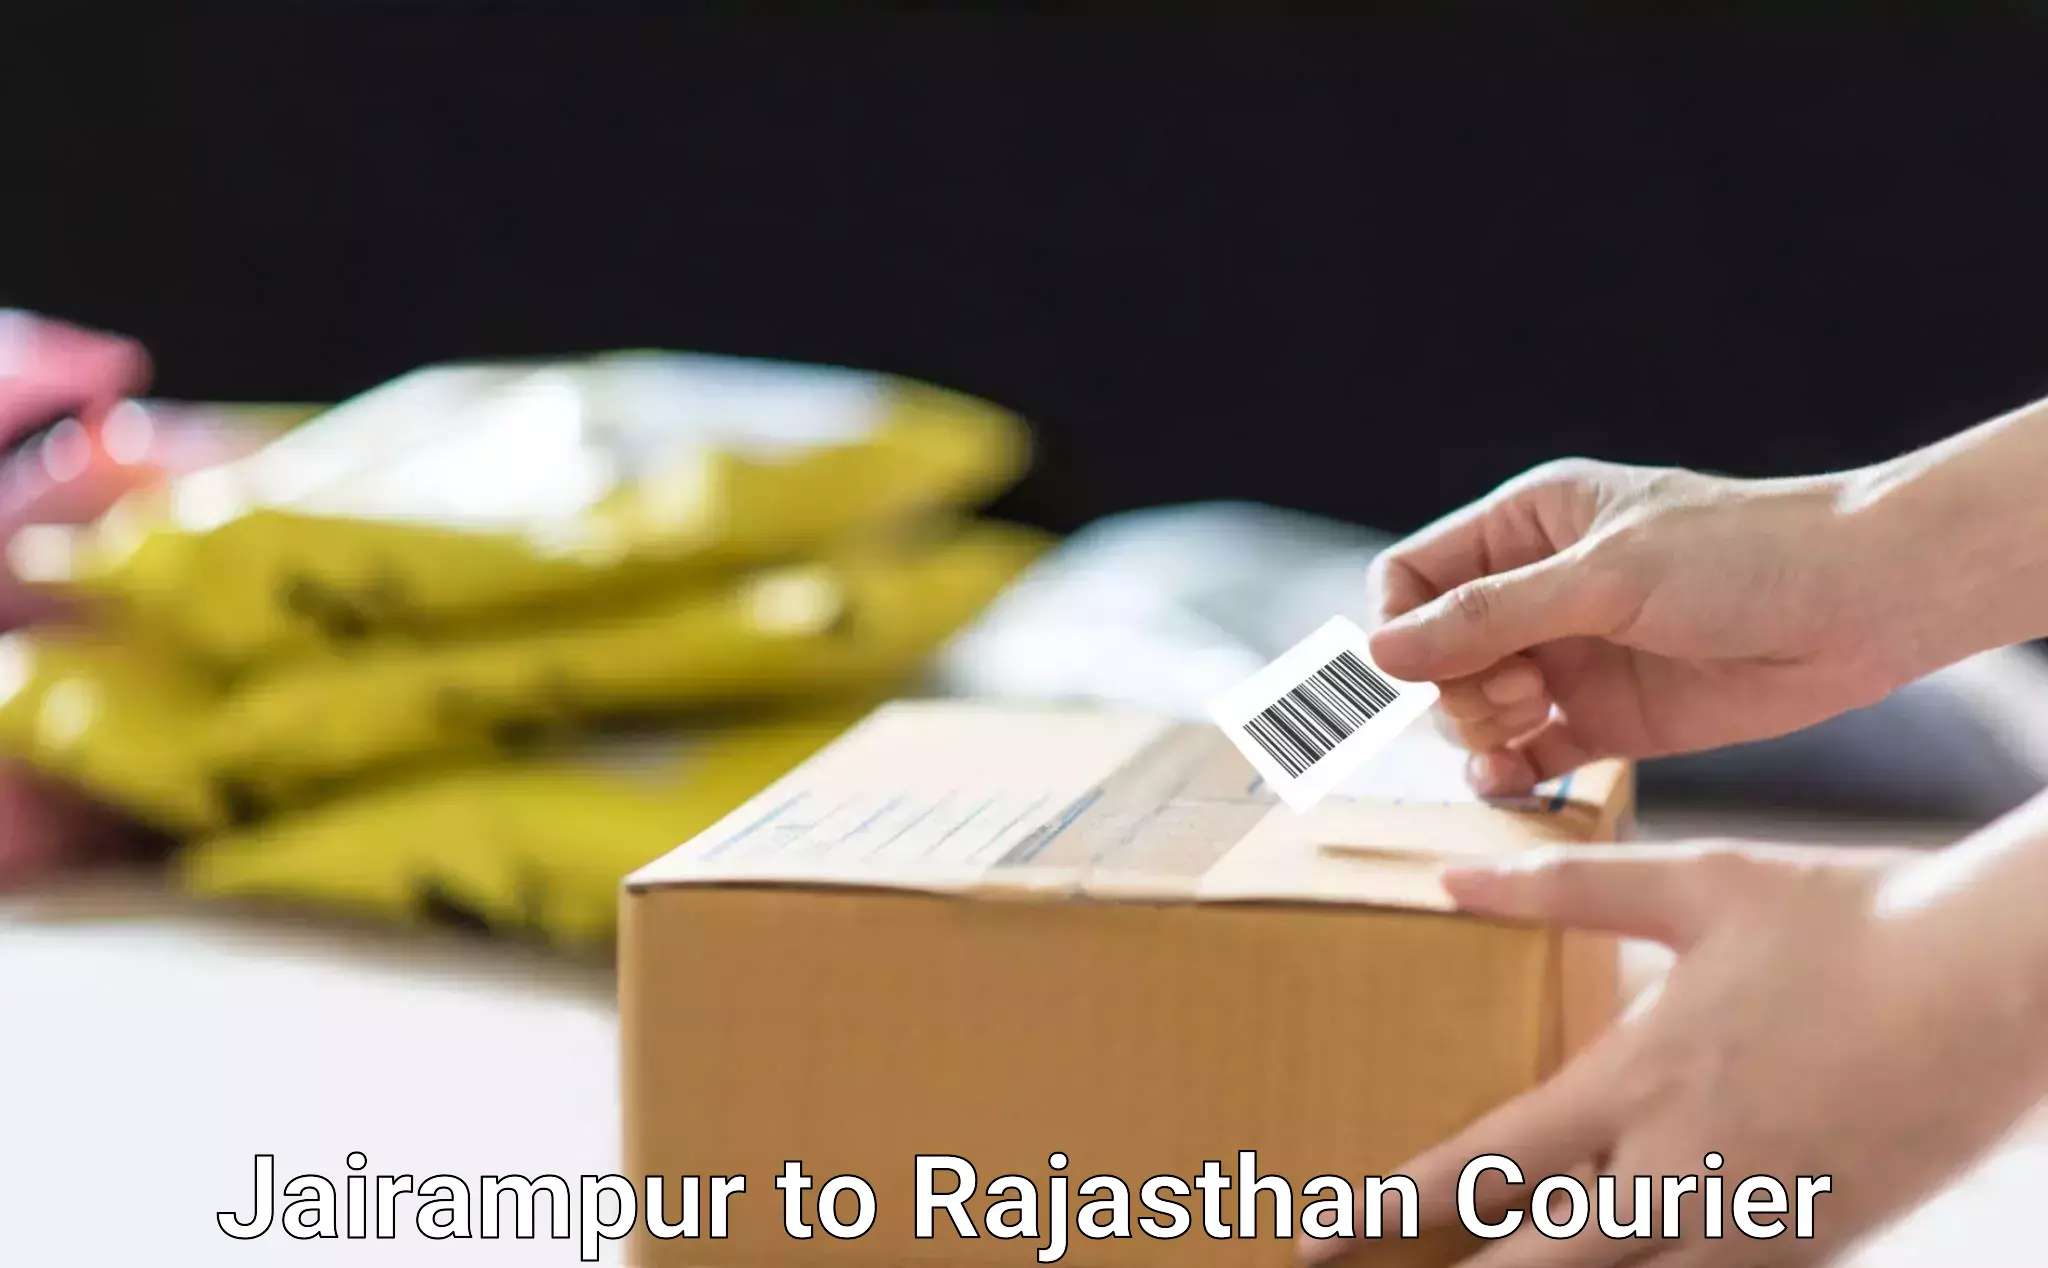 Professional courier services in Jairampur to Rajasthan